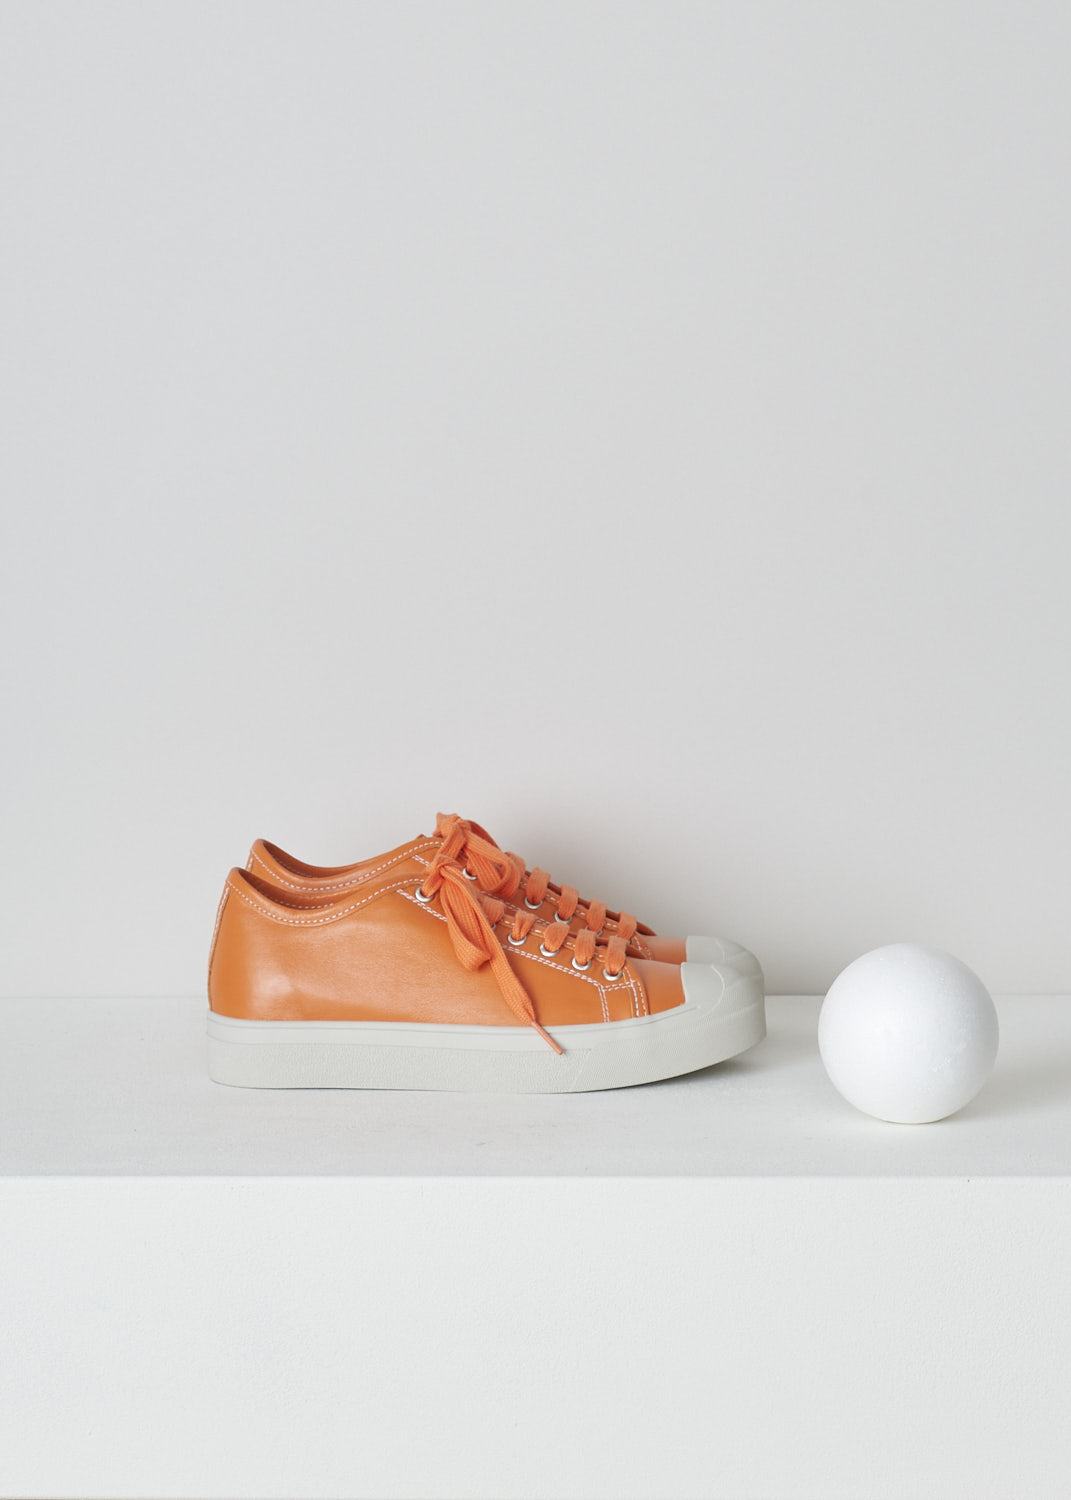 SOFIE Dâ€™HOORE, ORANGE LEATHER SHOES, FOLK_LMAST_LMAST_ORANGE, Orange, Side, These orange leather sneakers feature a front lace-up closure with orange laces. These sneakers have a round toe with a white rubber toe cap that goes down into the white rubber sole. Contrasting white stitching is used throughout. The sneakers come with an additional pair of white laces.
